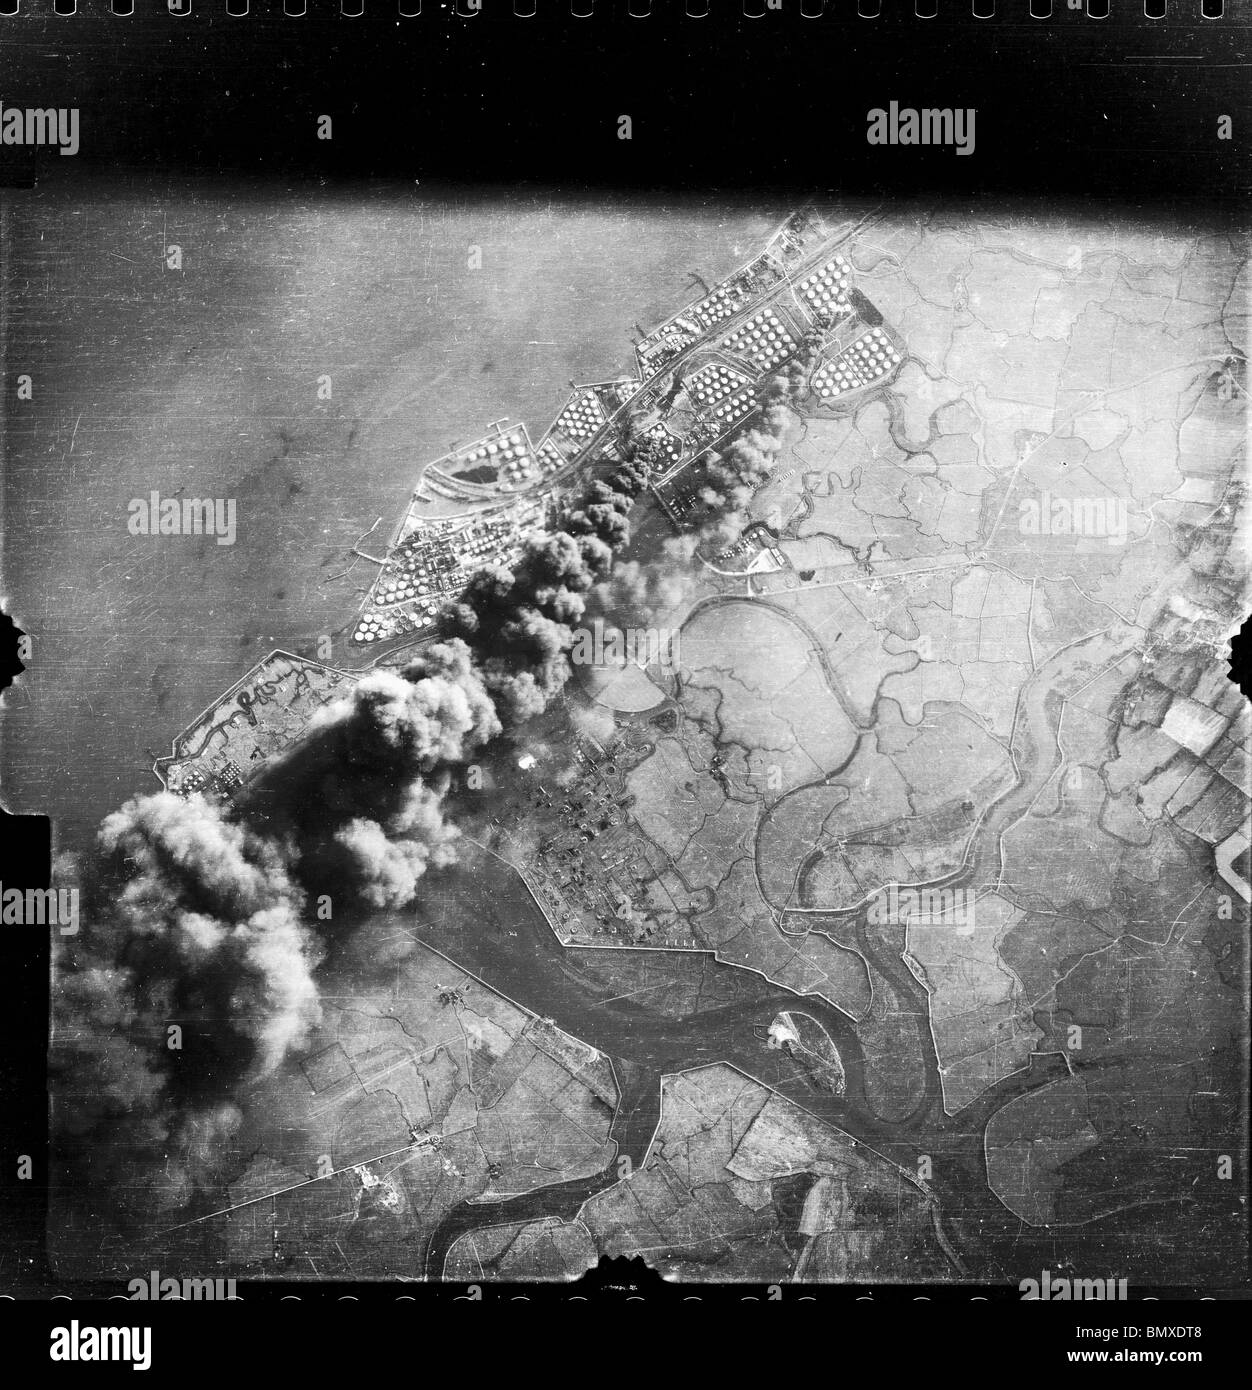 Thames Haven - Kent Luftwaffe Bombing Raid on Oil Refinery Stock Photo